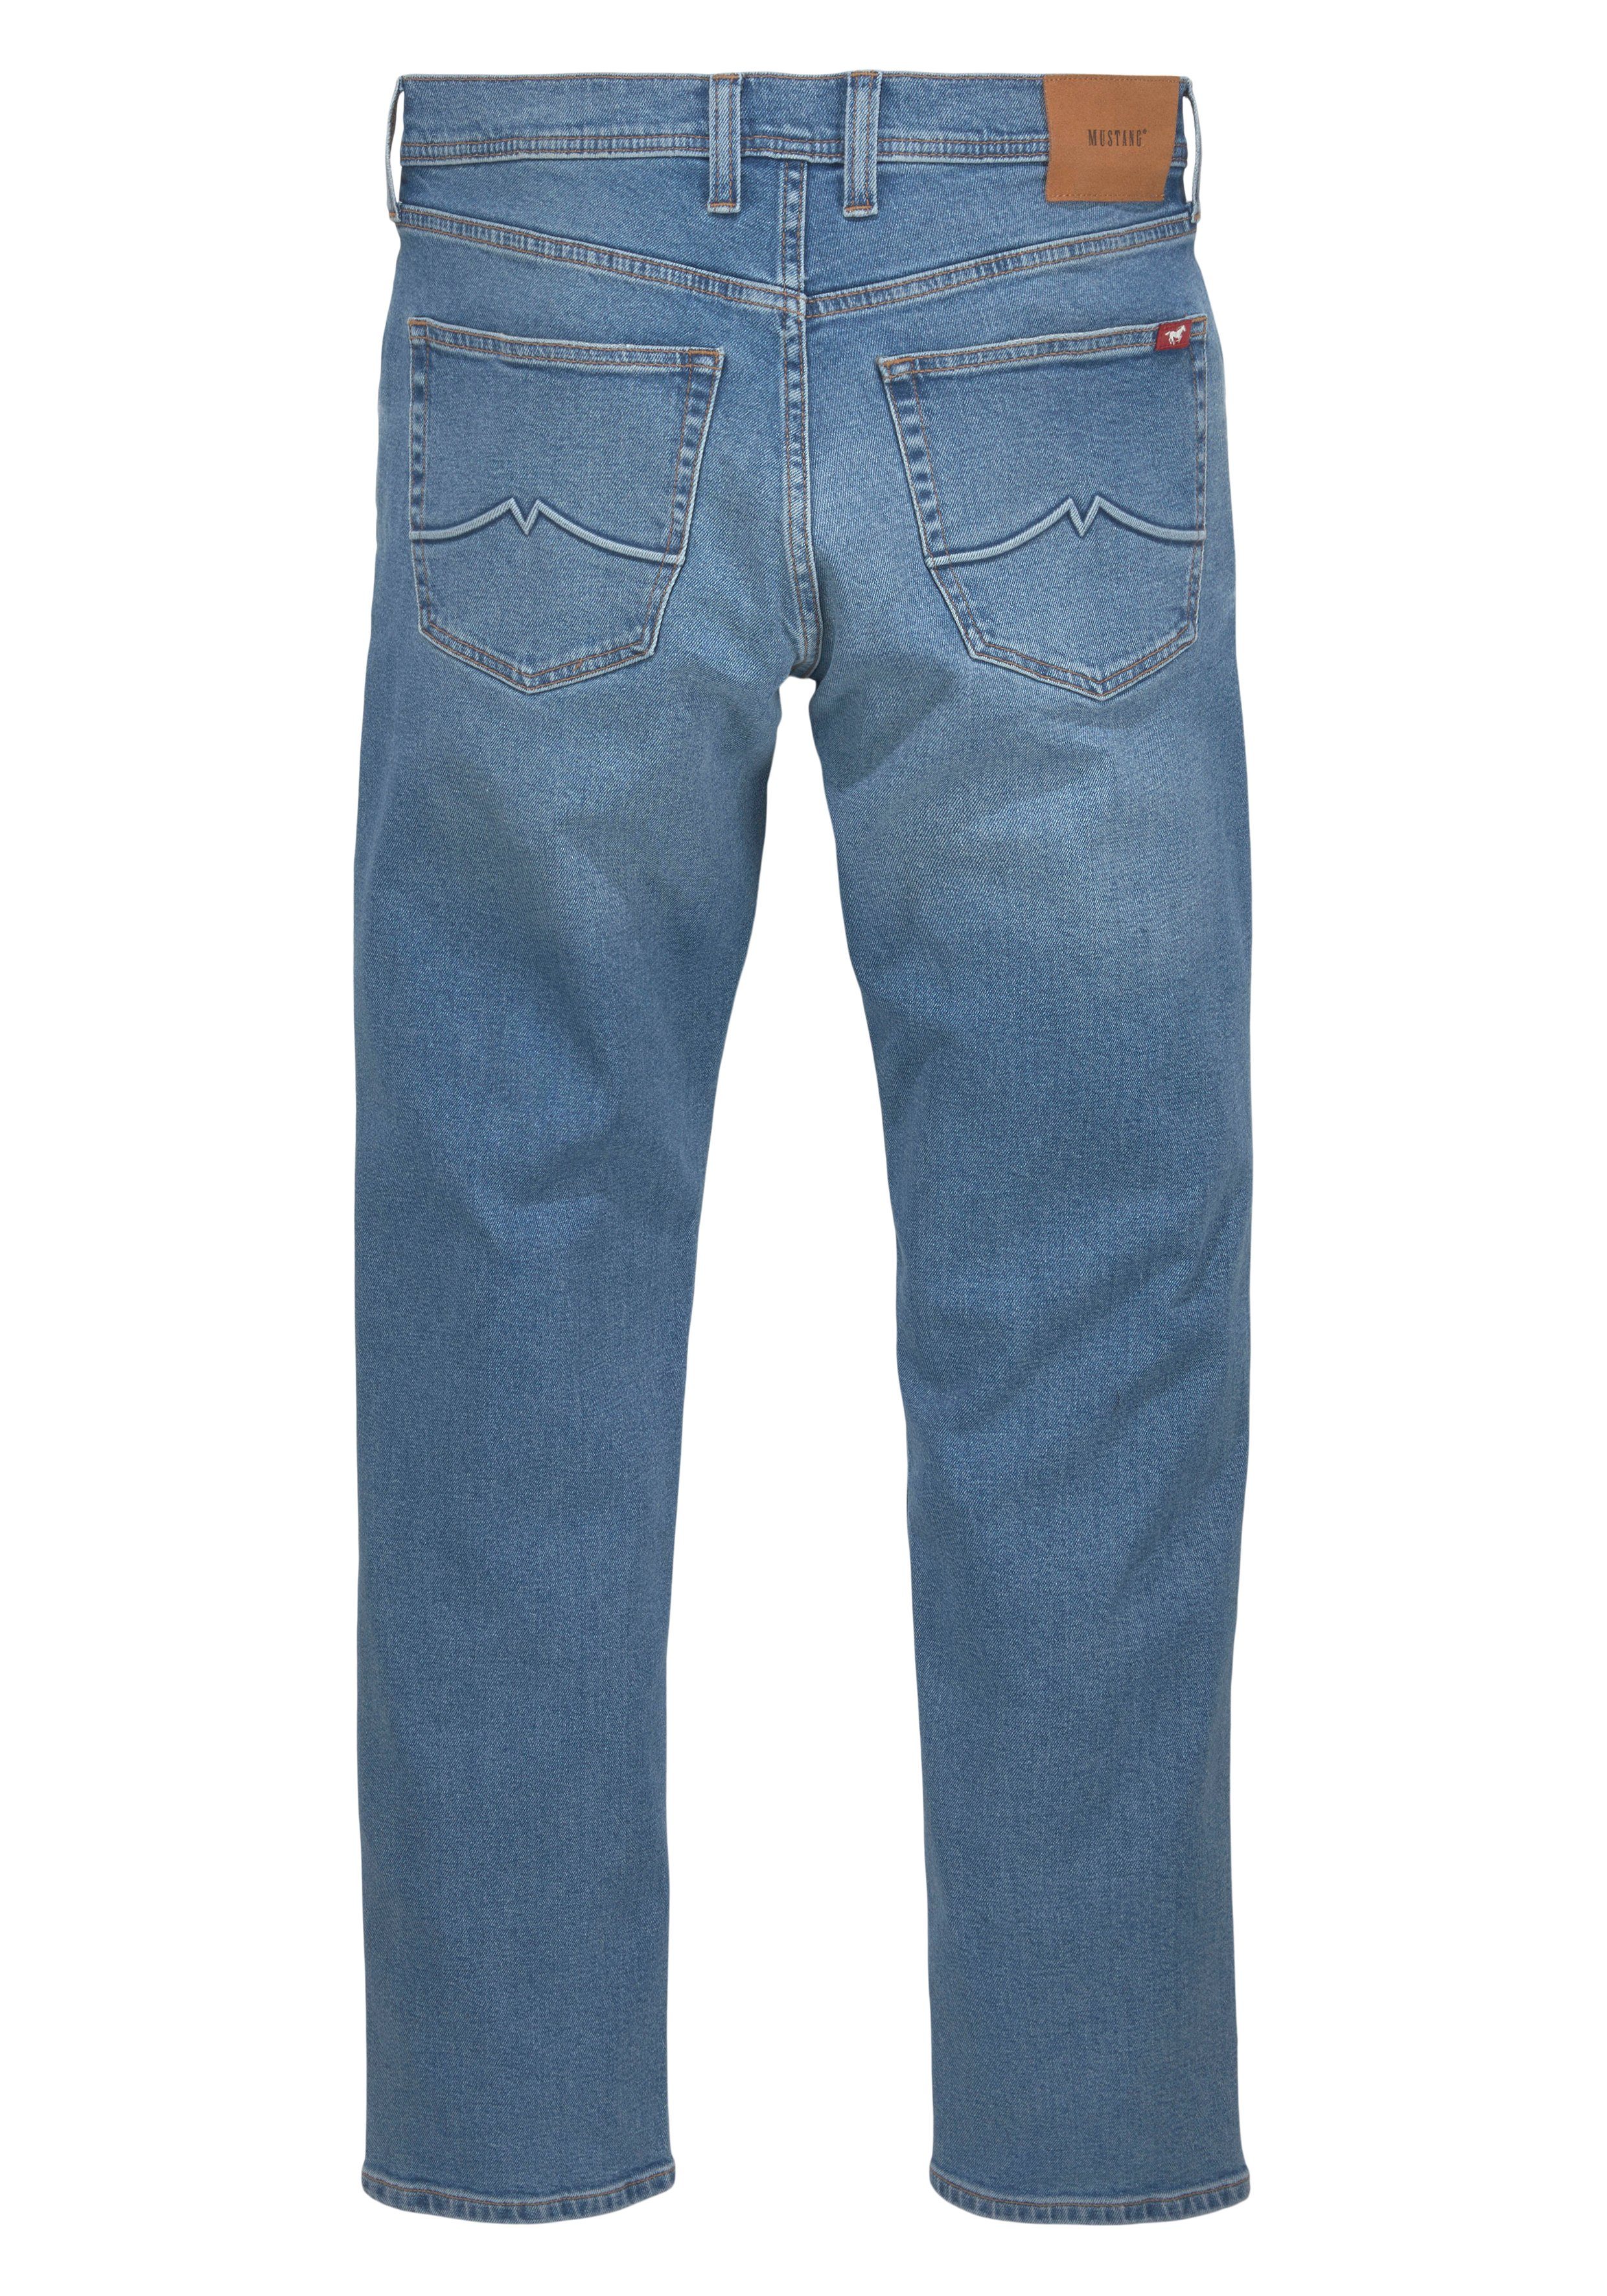 MUSTANG Straight-Jeans Style blue washed Denver medium